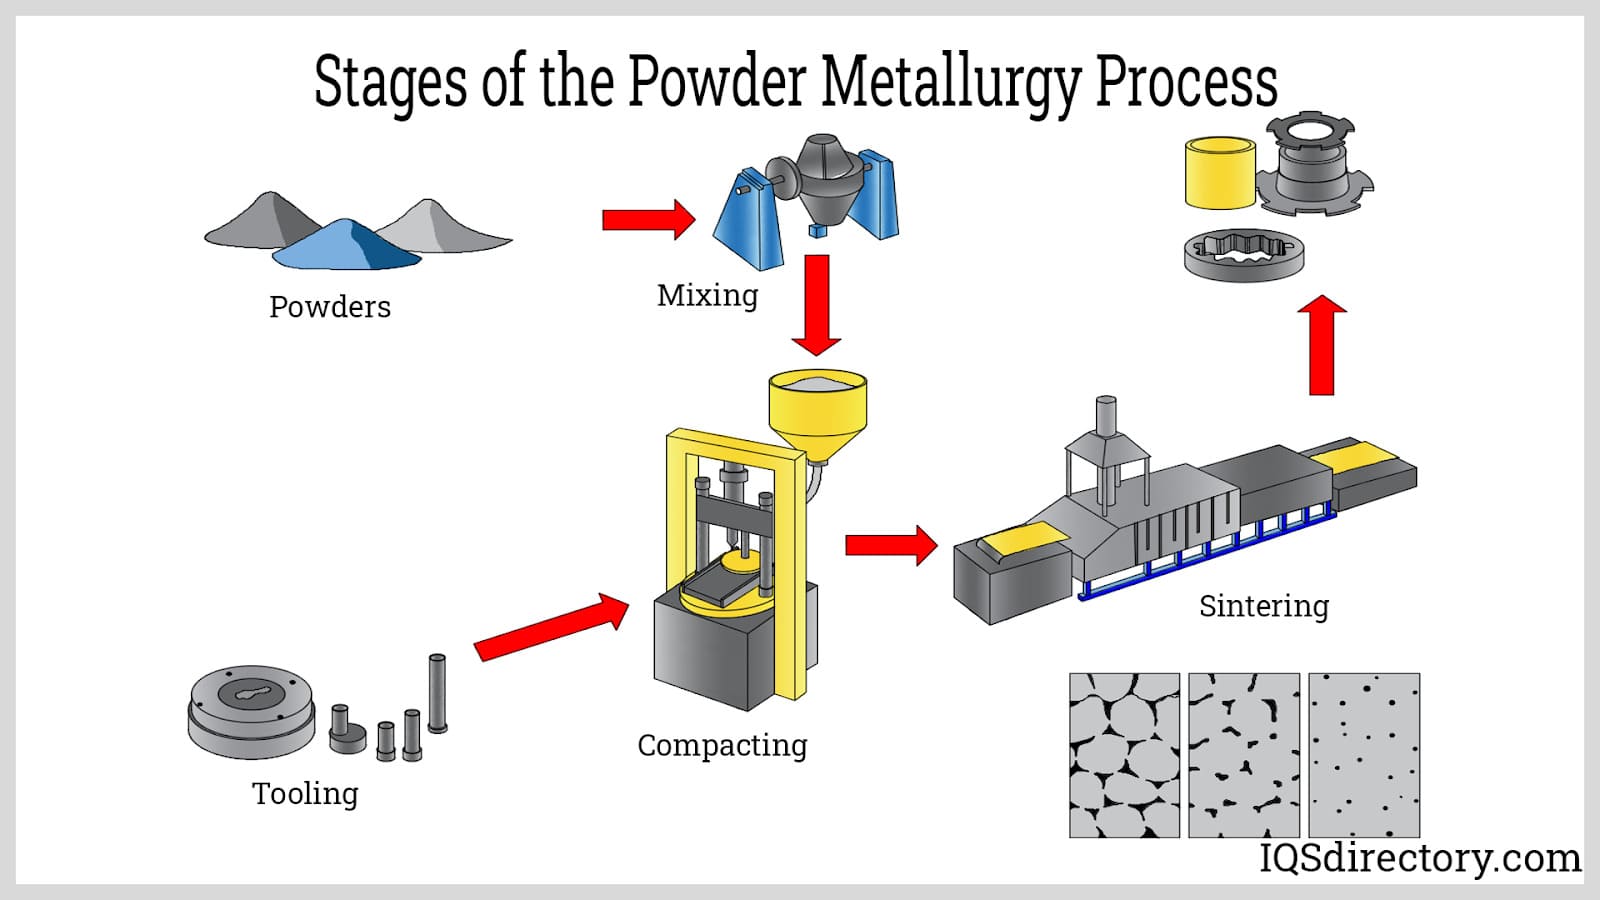 Stages of the Powder Metallurgy Process